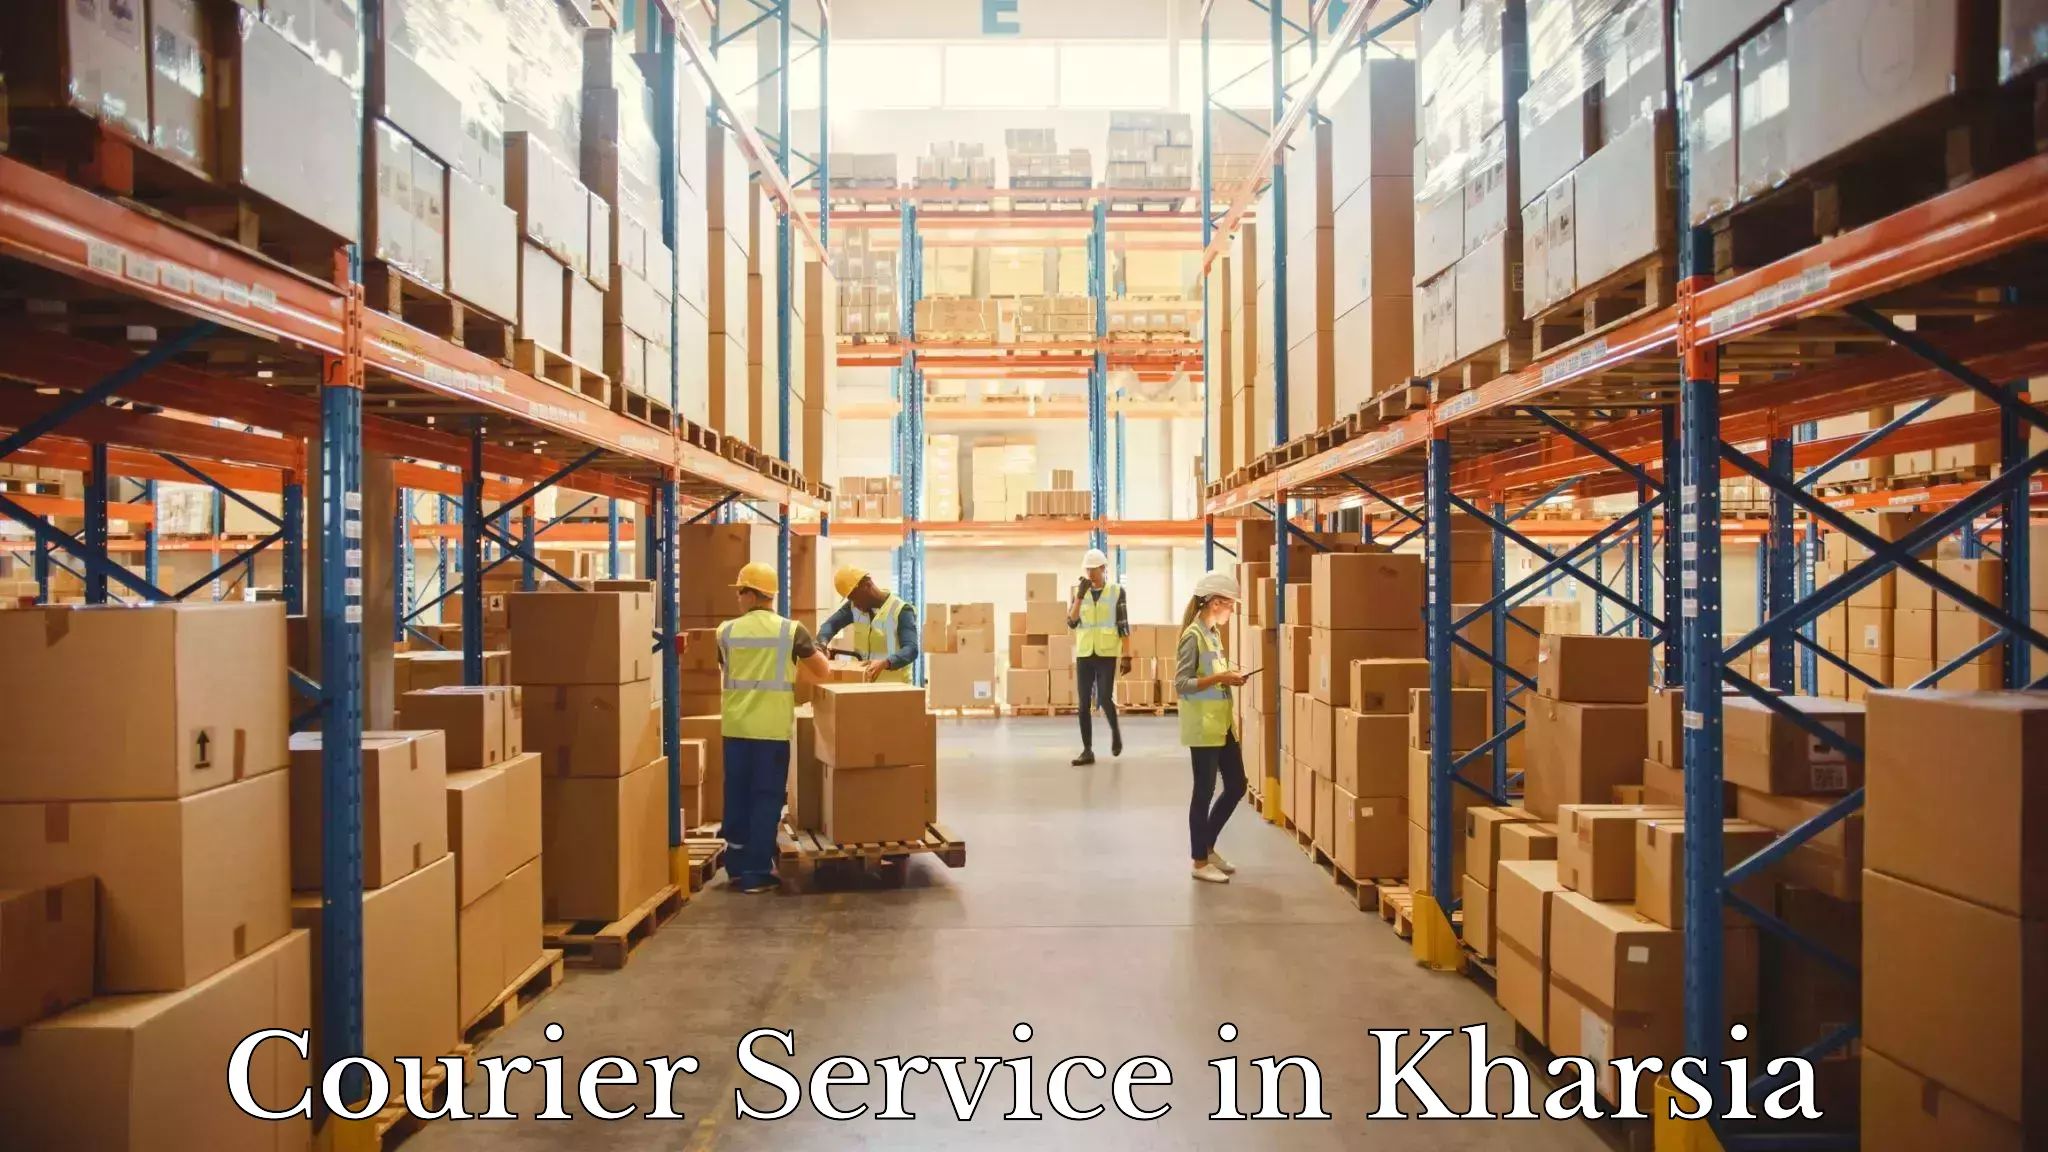 Express delivery solutions in Kharsia